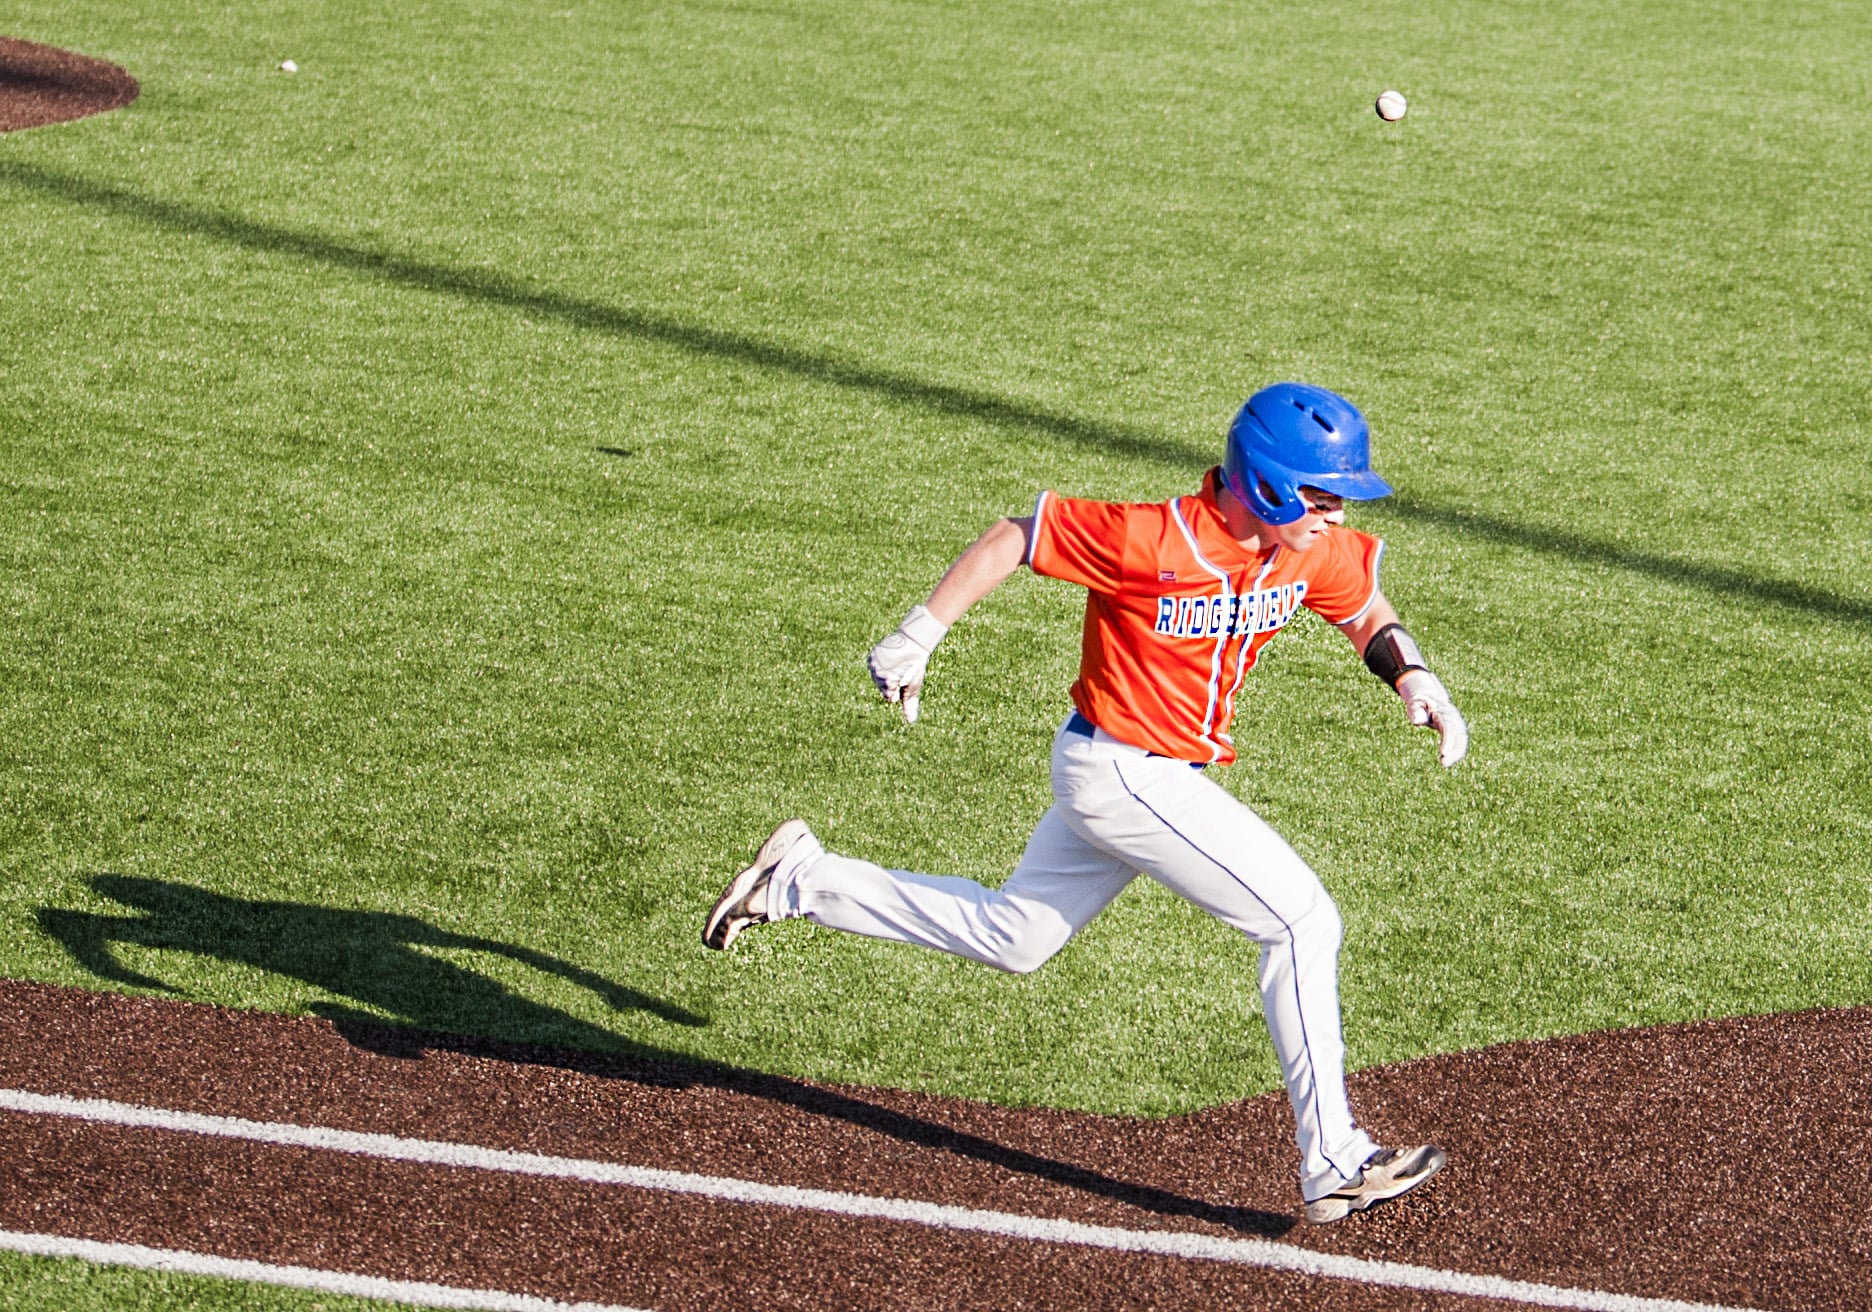 Ridgefield's Clay Madsen tries to beat out a throw in a 2A district championship baseball game Friday at Propstra Stadium. Ridgefield won 4-2.